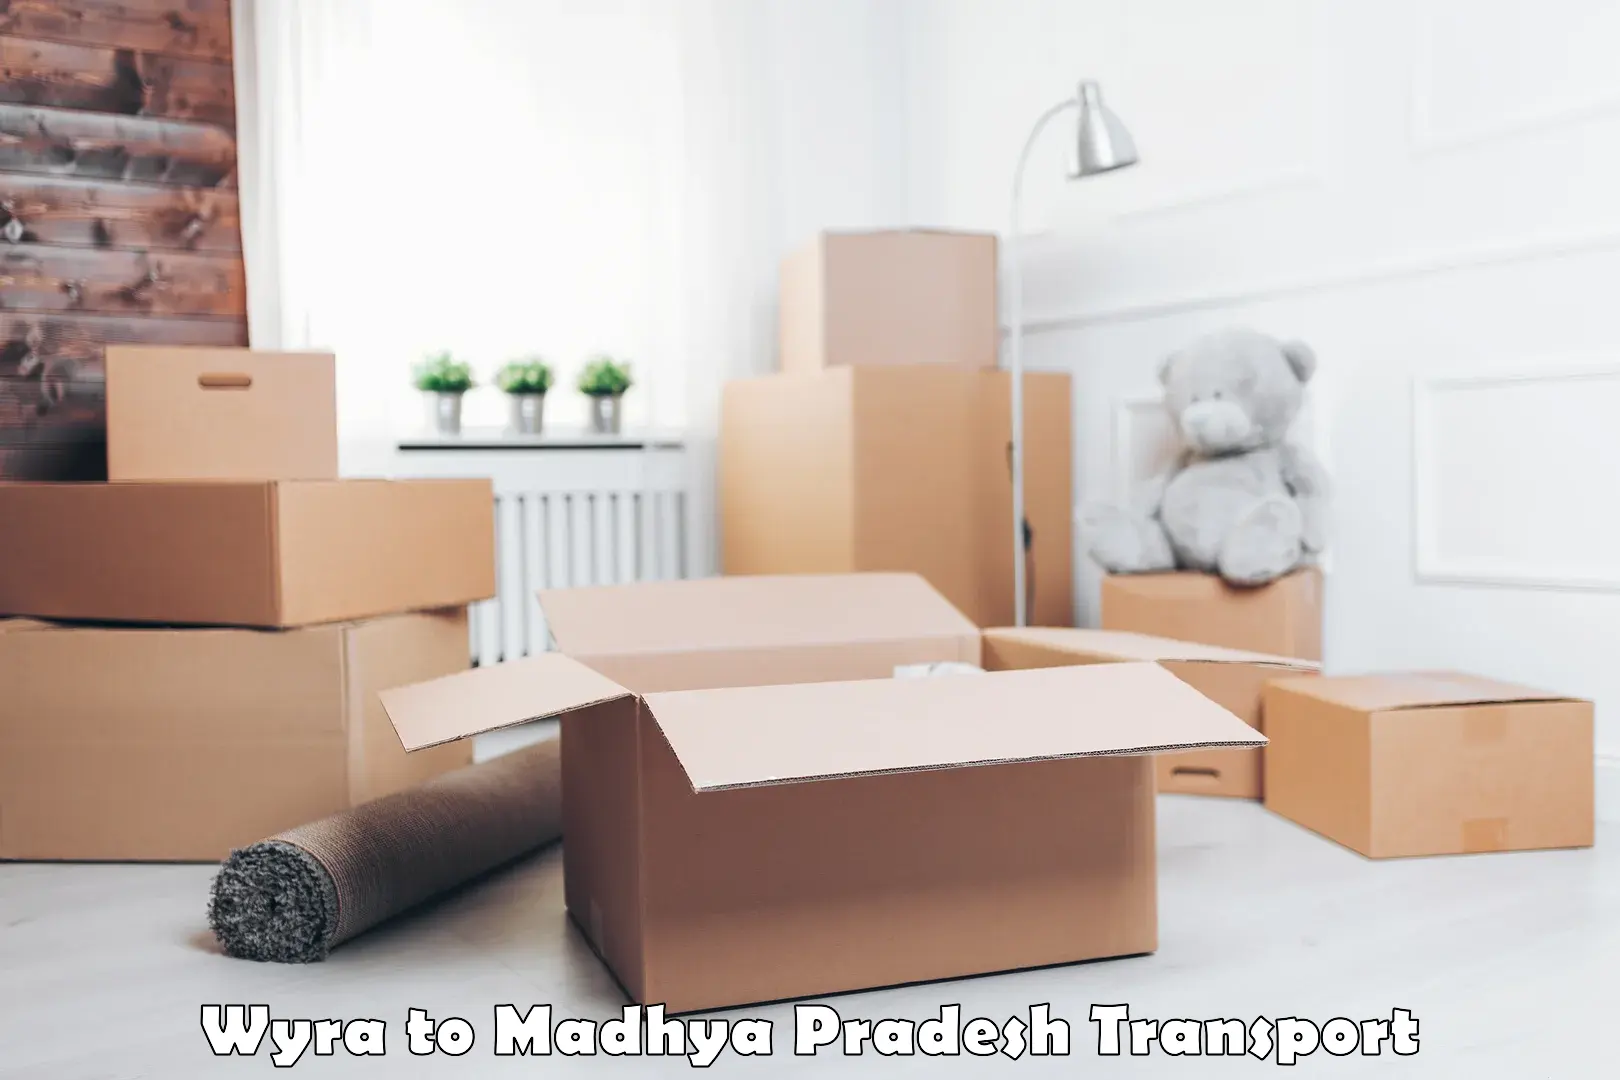 Online transport service in Wyra to Madwas